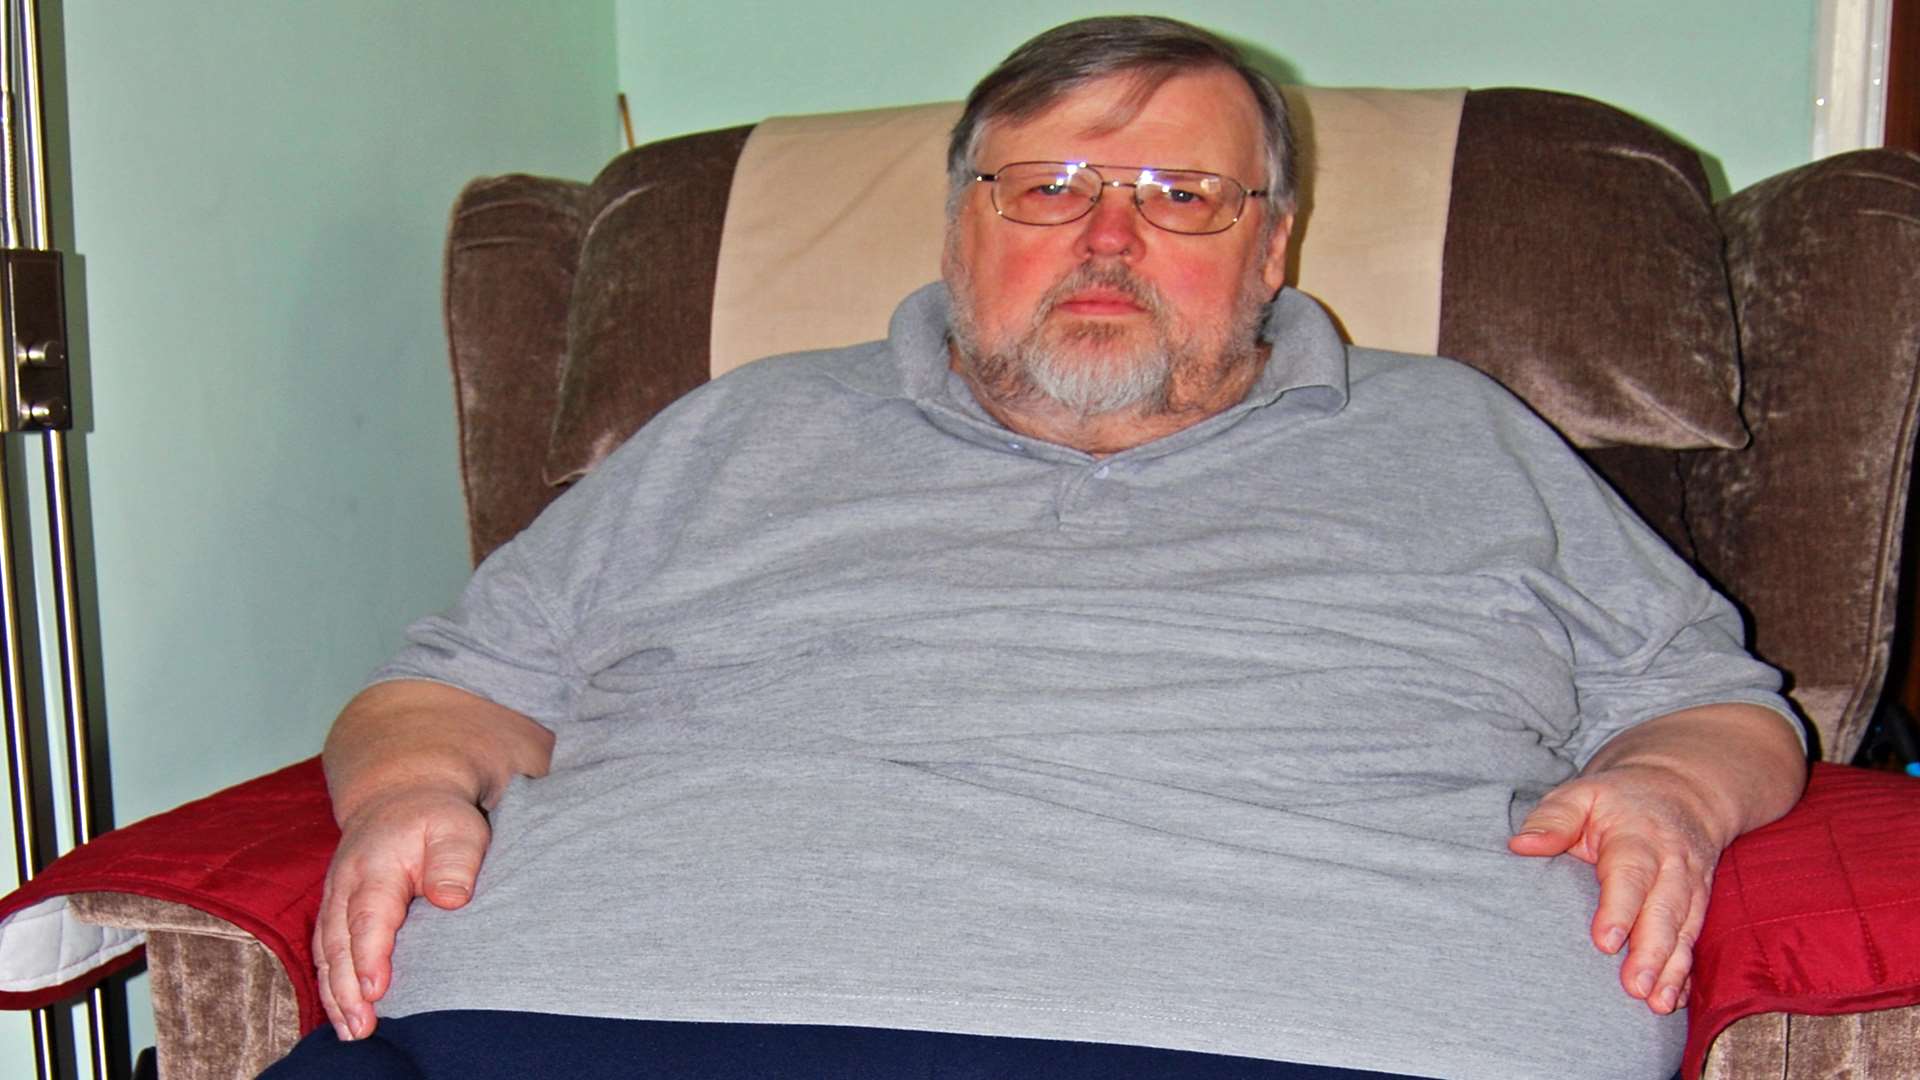 Ian Sandford suffered massive weight gain after a tumour